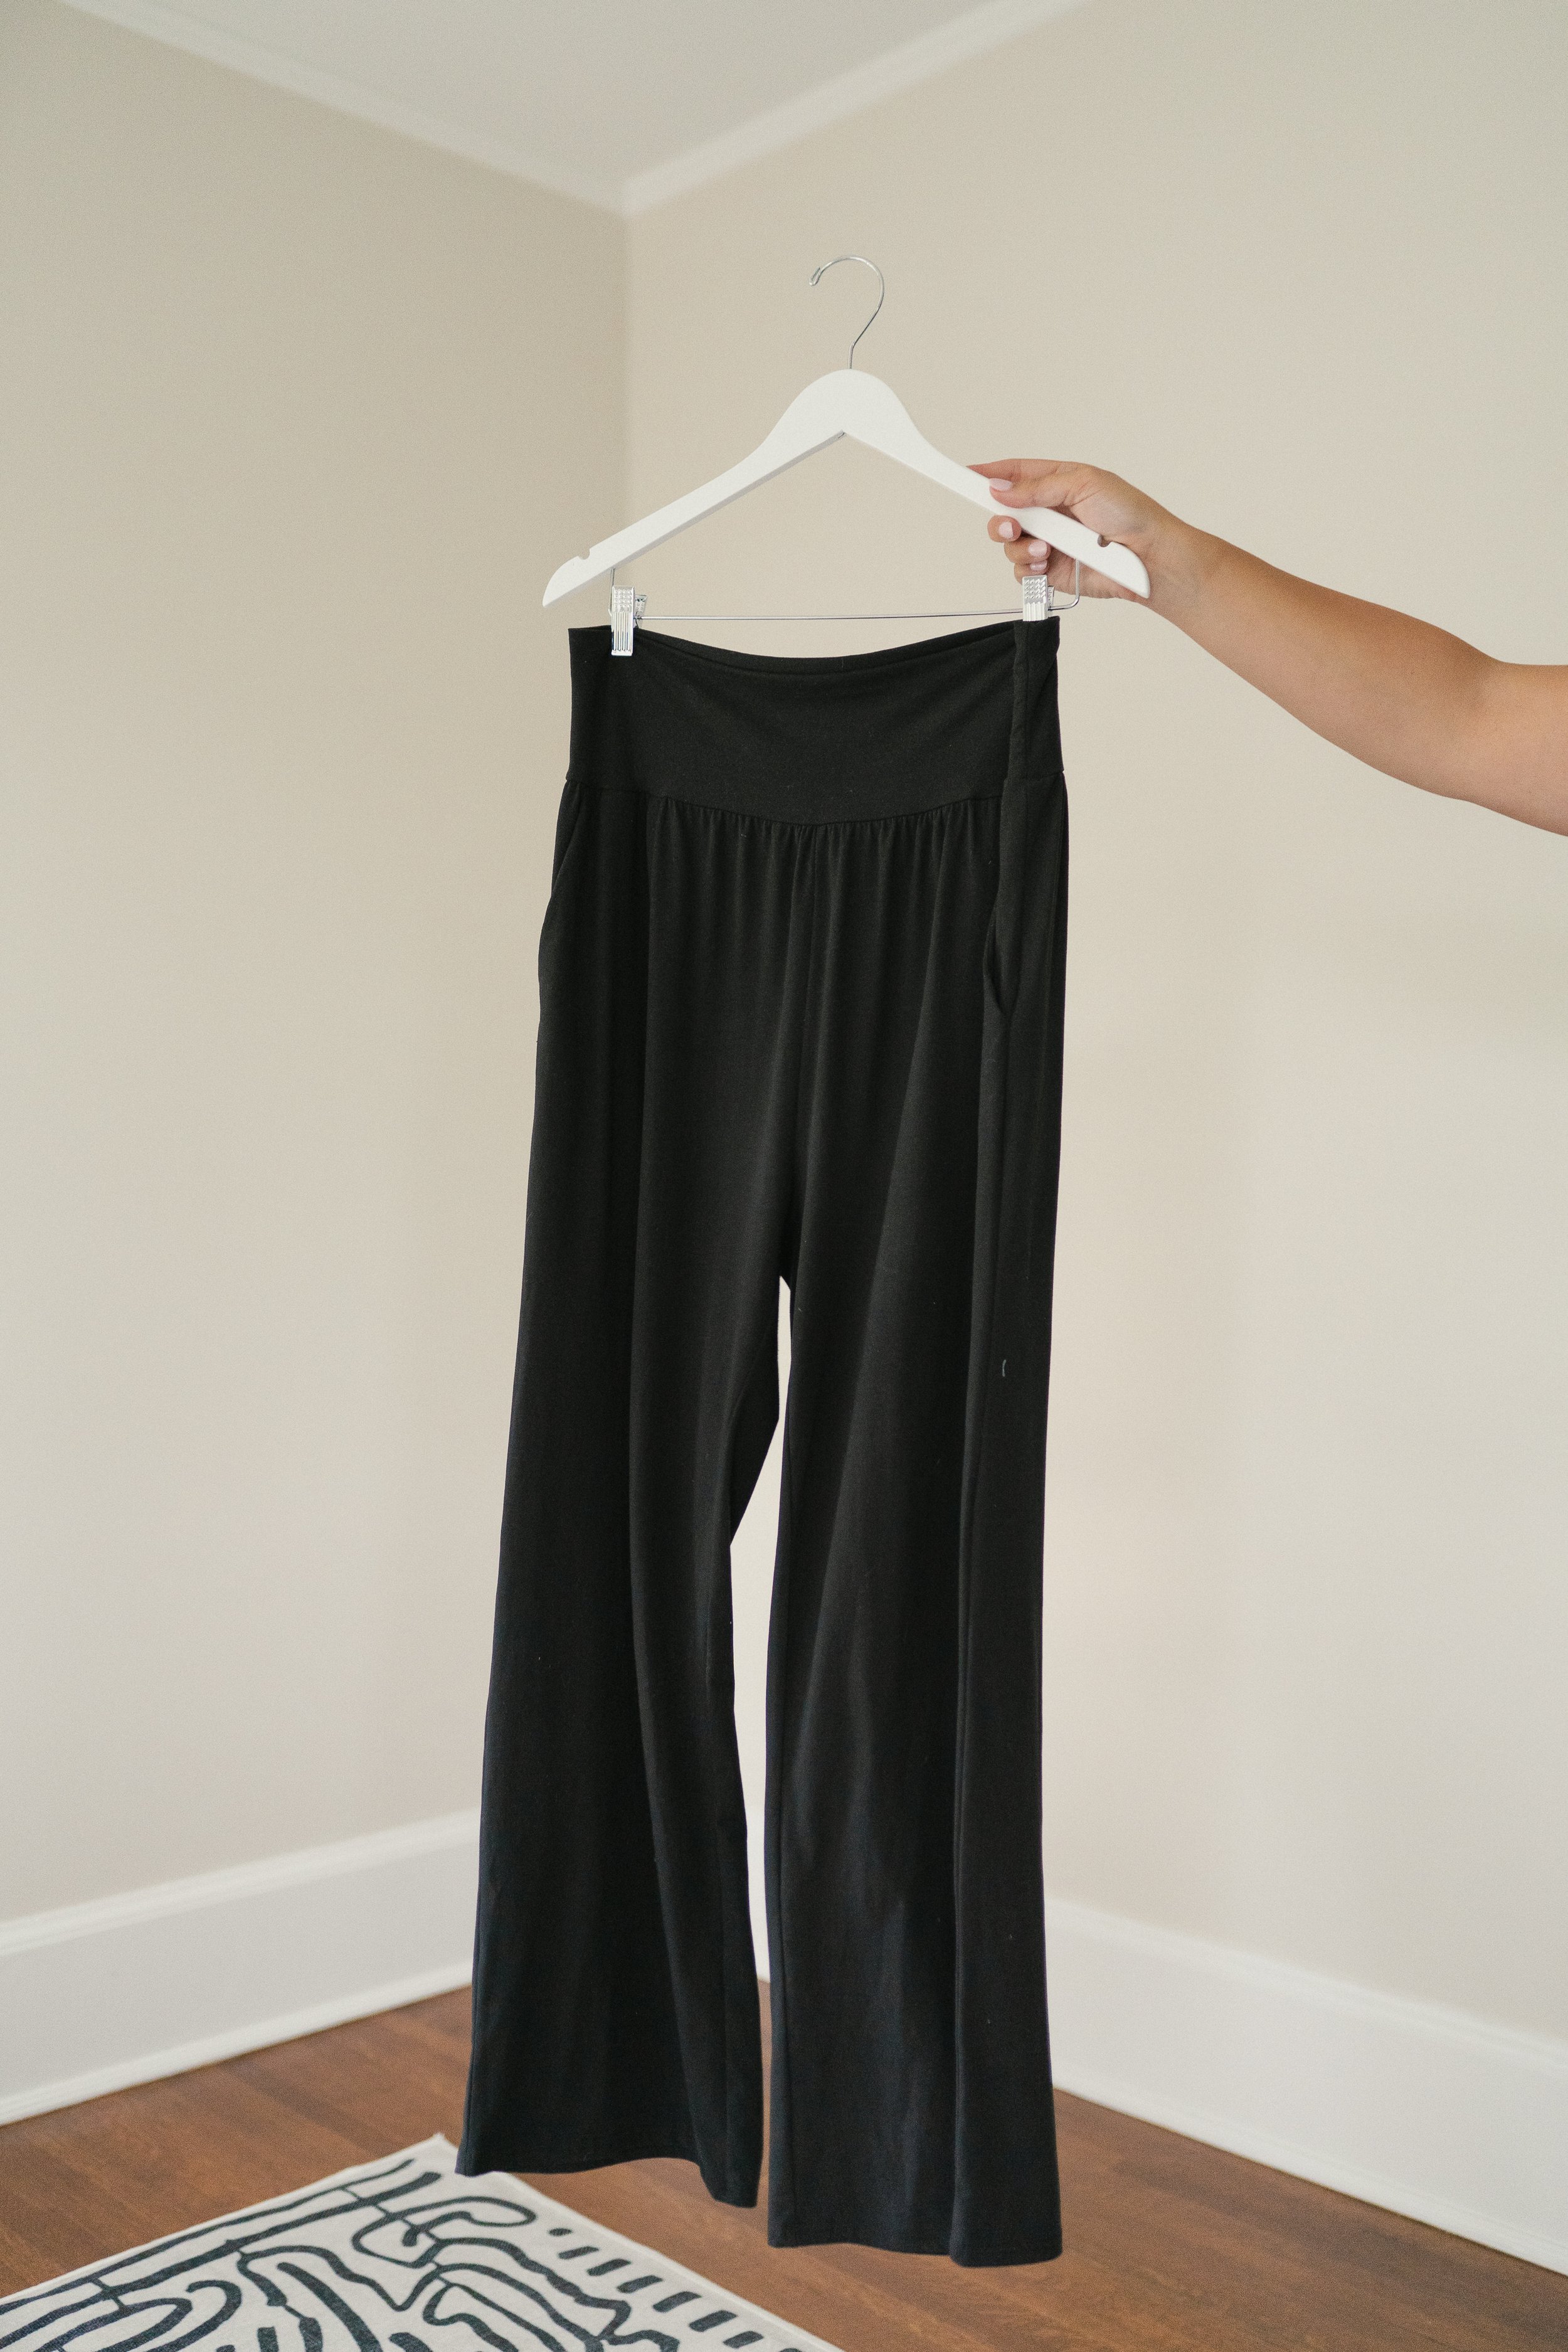 StayAtHome Outfits: 11 Ways To Wear Athleta's Foldover Waist Sweatpants  Wide  leg pants outfit, Wide leg yoga pants, Wide leg yoga pants outfit